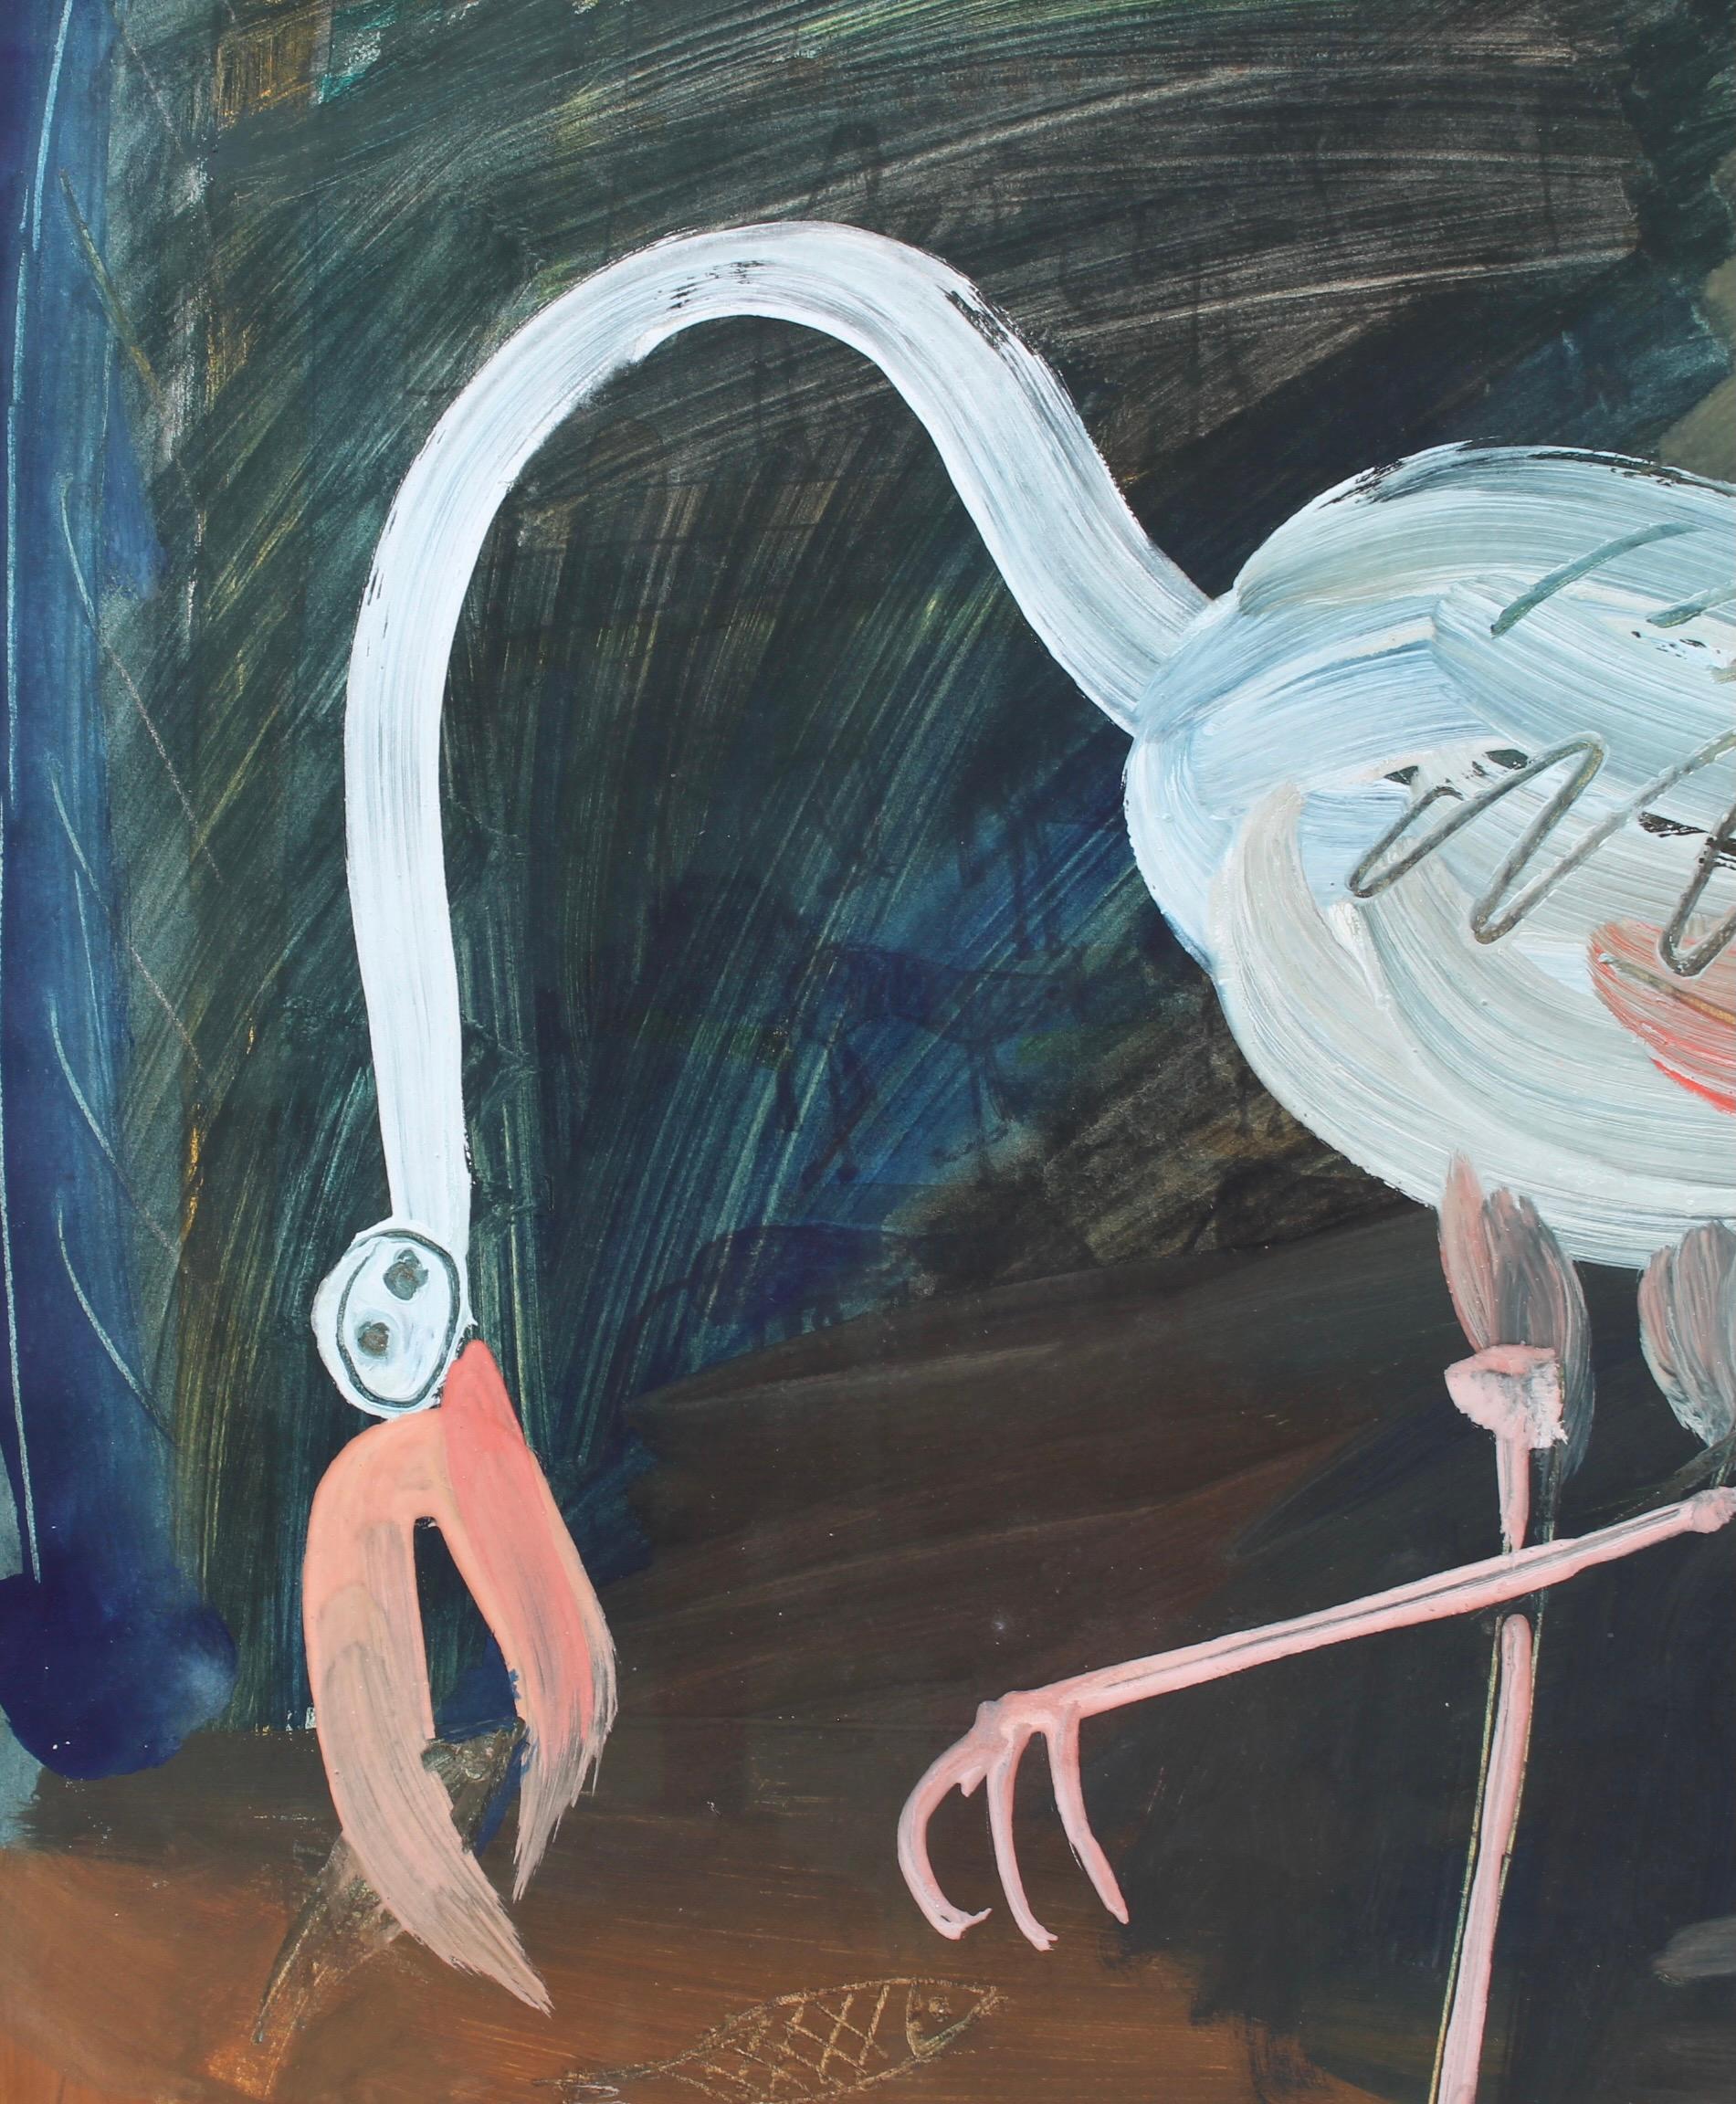 'Flamingo in the Camargue', gouache on art paper, by Raymond Debiève (circa 1960s). A Mid-Century modern depiction of the Camargue region which is a vast, swampy delta near Arles, France, very exotic, with tall marsh grasses where pink flamingos,